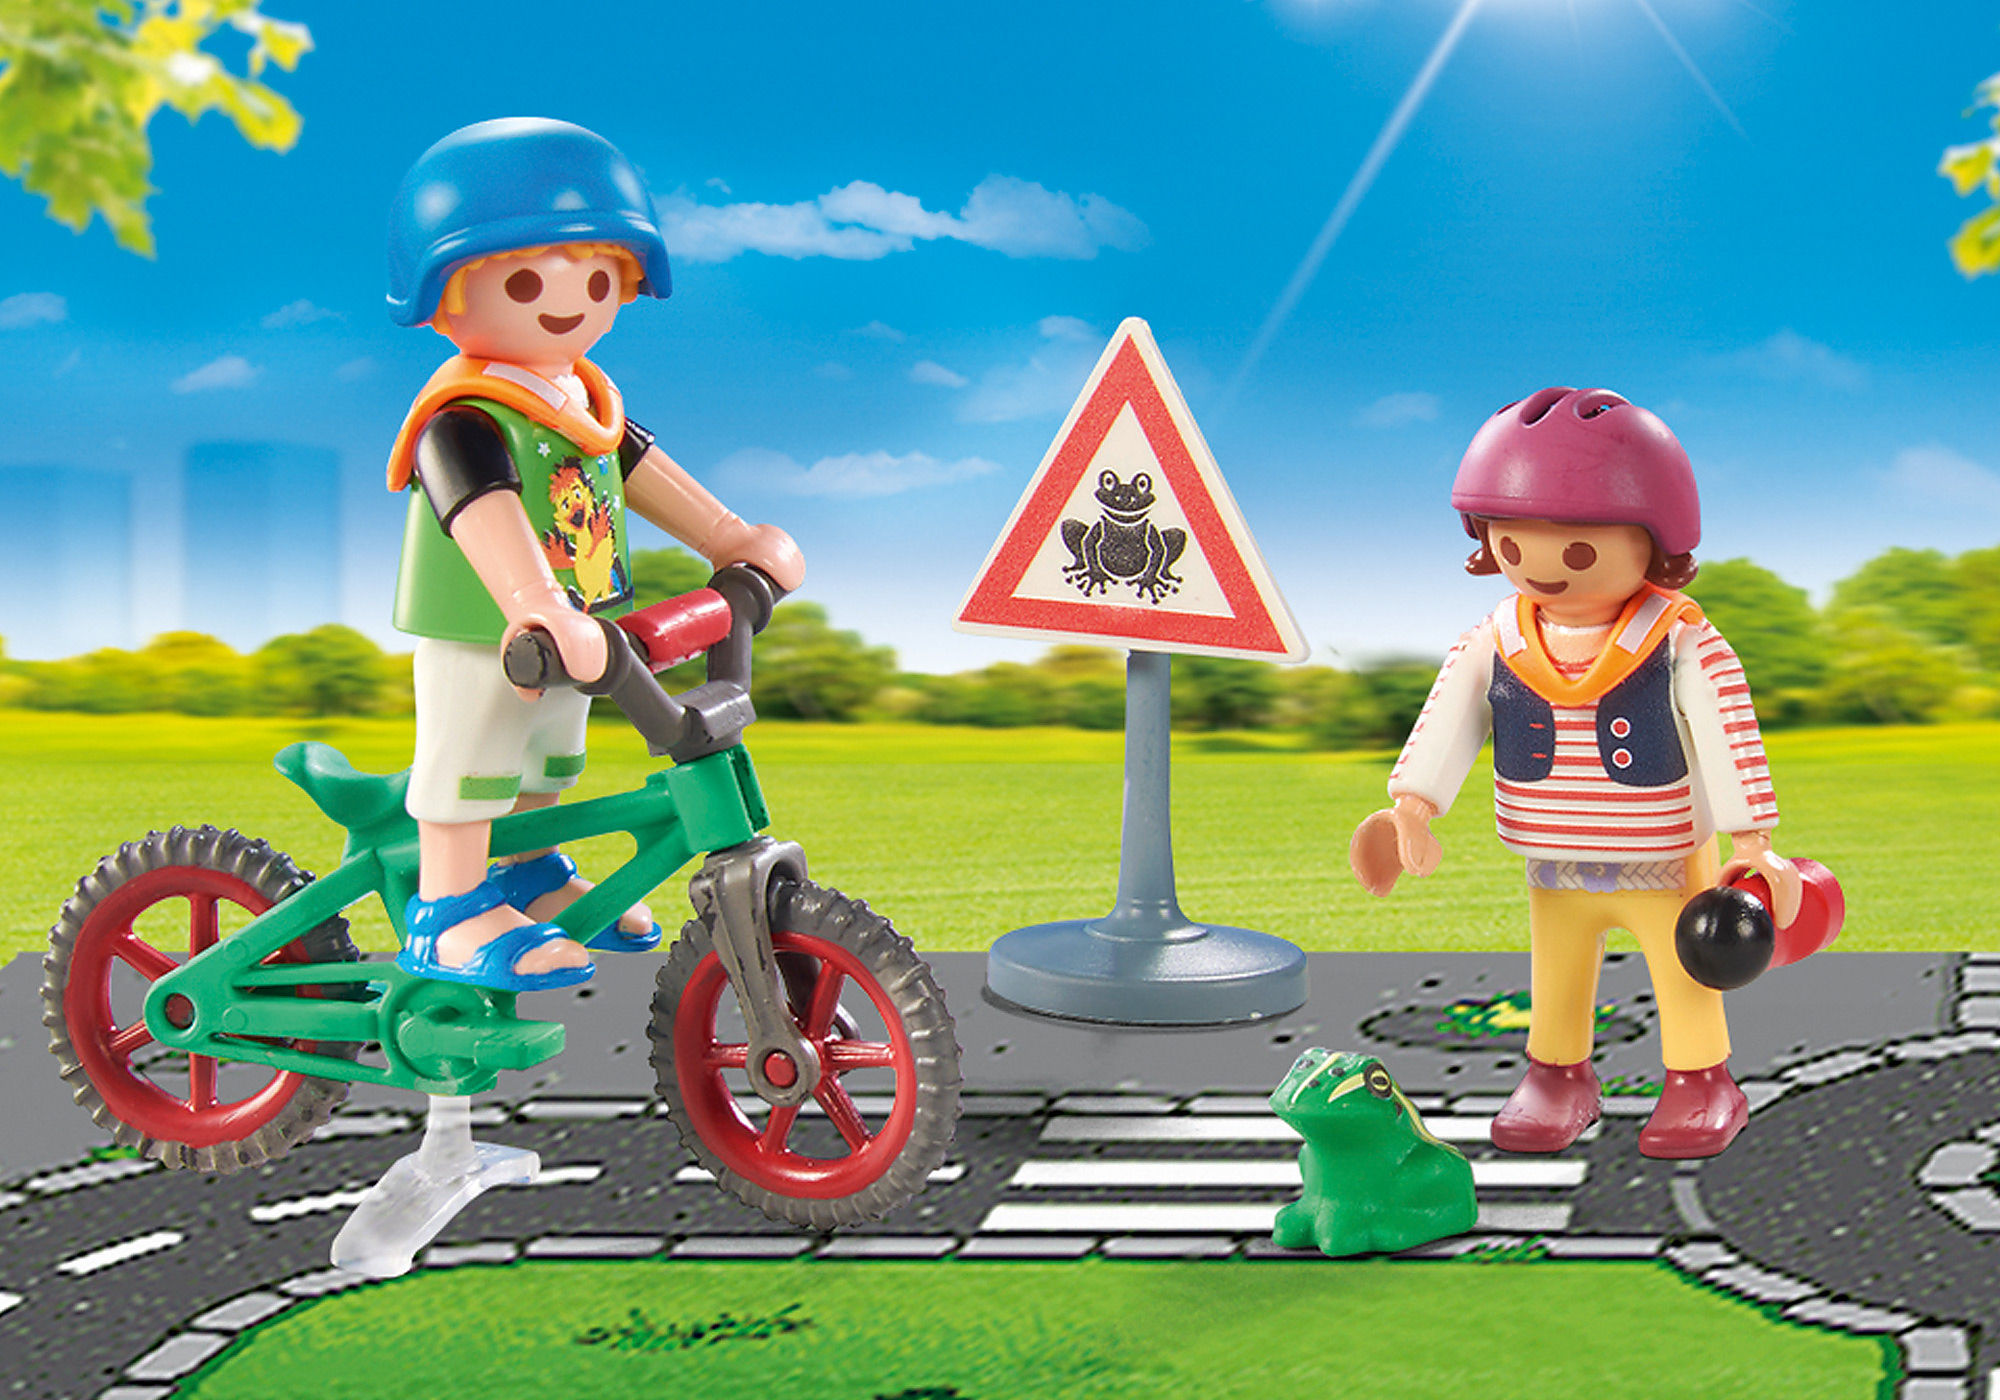 Playmobil - Bicycle Excursion : Toys & Games 